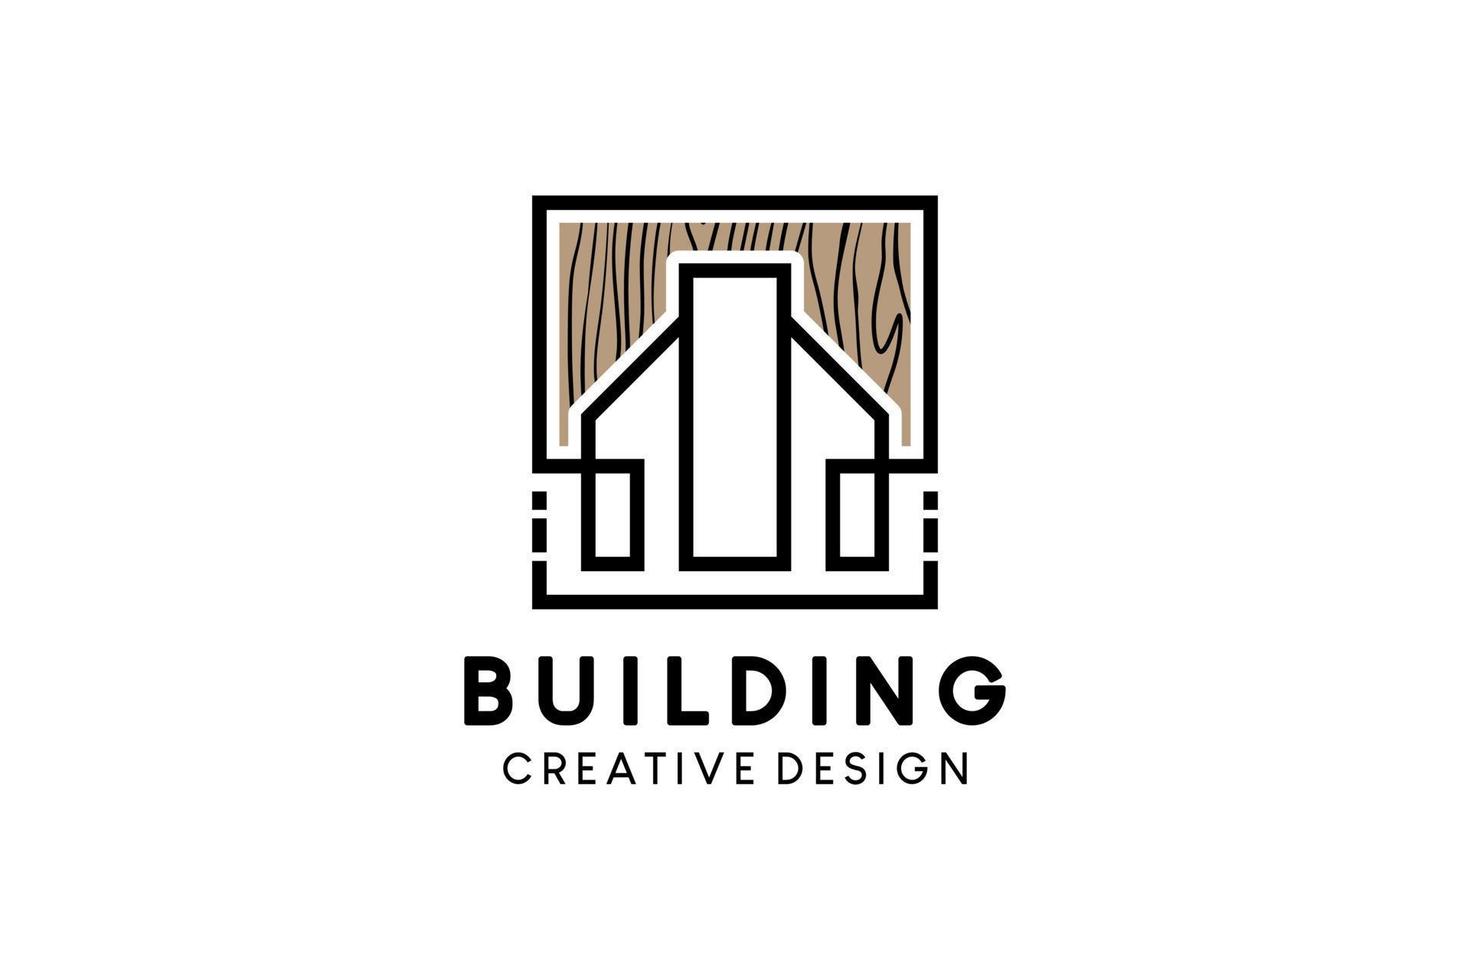 Building design striped style in wood motif for logo of wooden building, warehouse, real estate vector